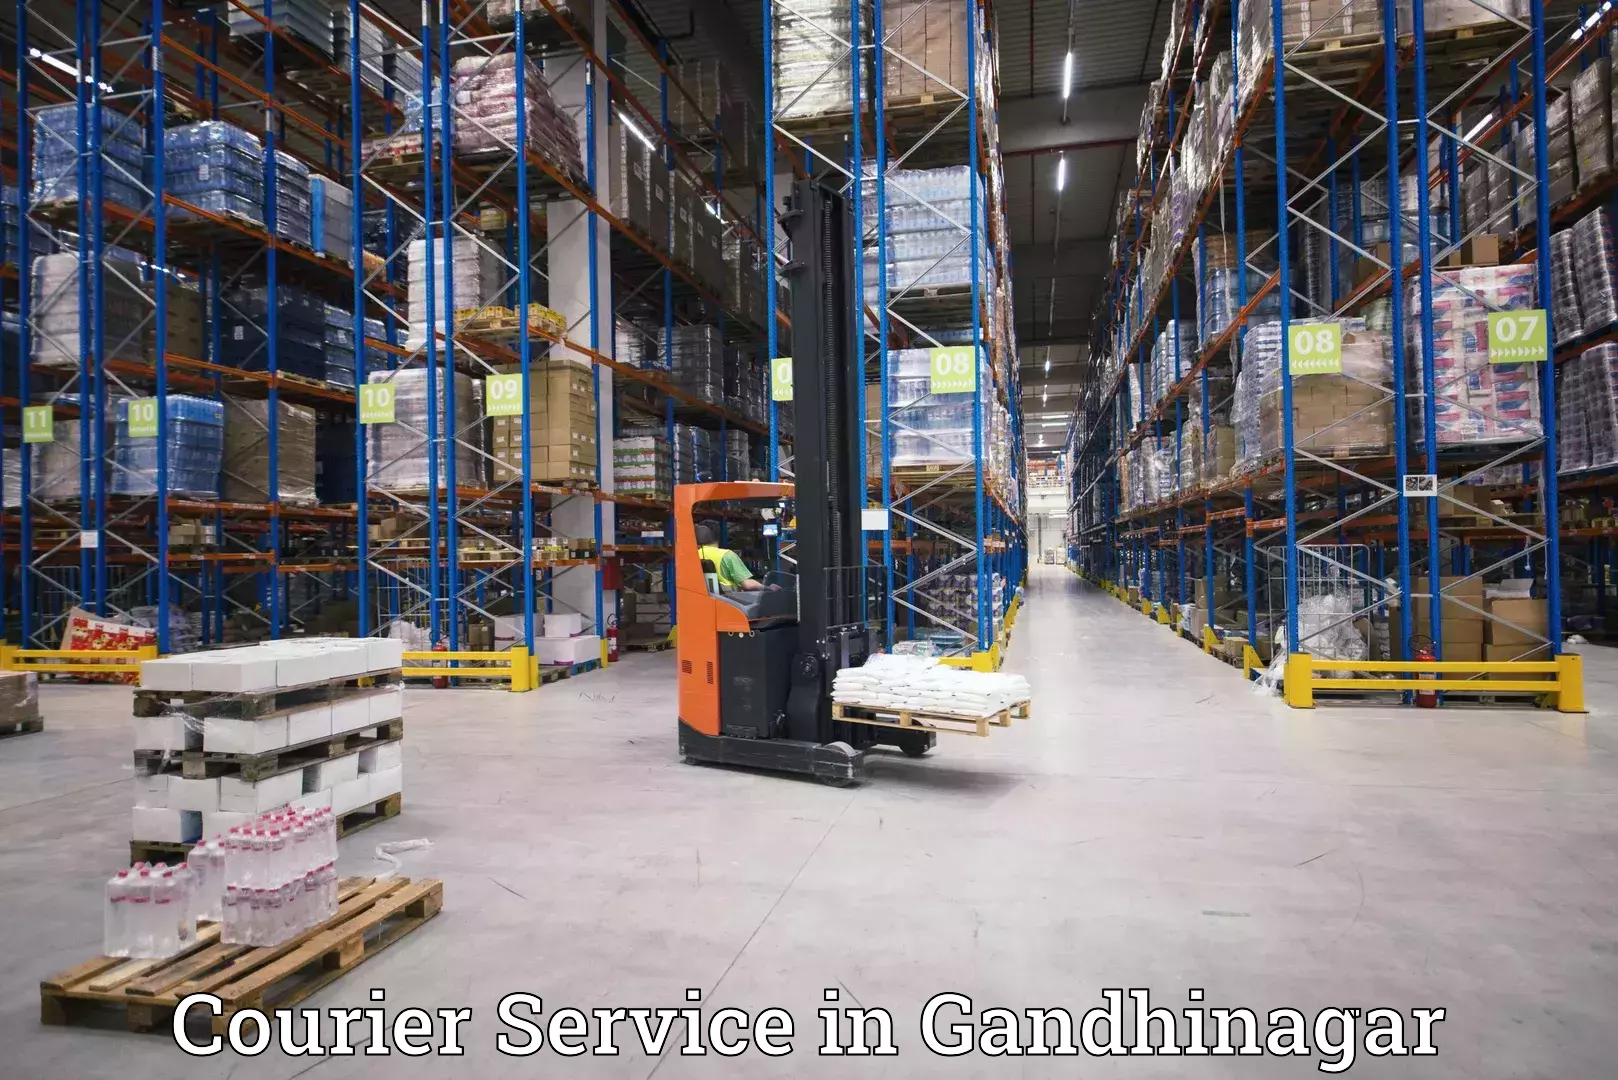 Postal and courier services in Gandhinagar